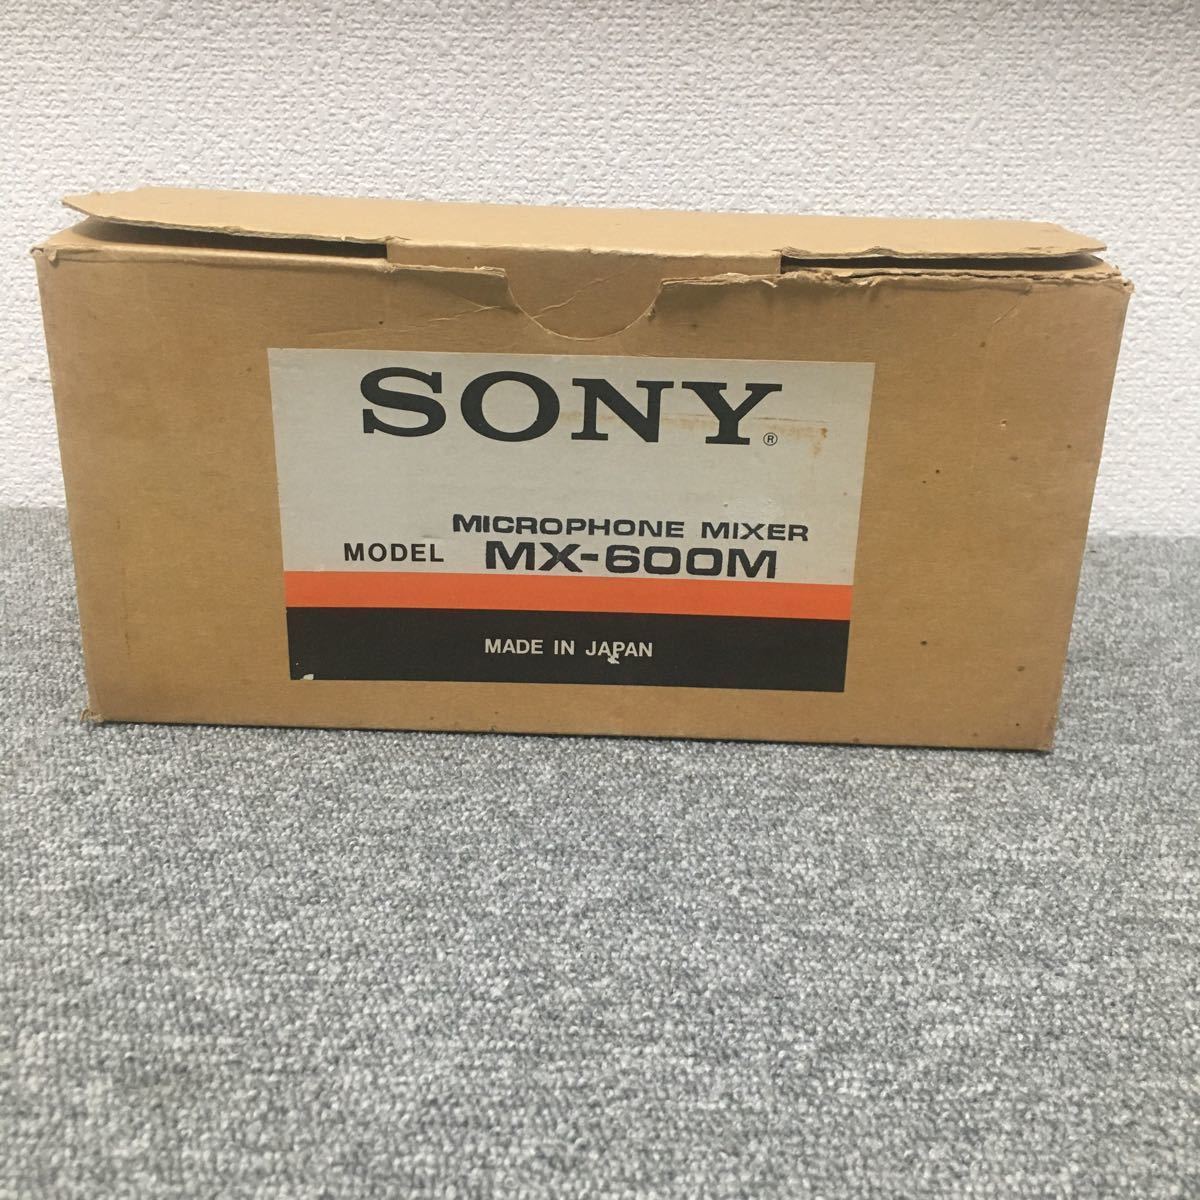  Showa Retro SONY Sony microphone mixer MX-600M box attaching that time thing * unused goods 